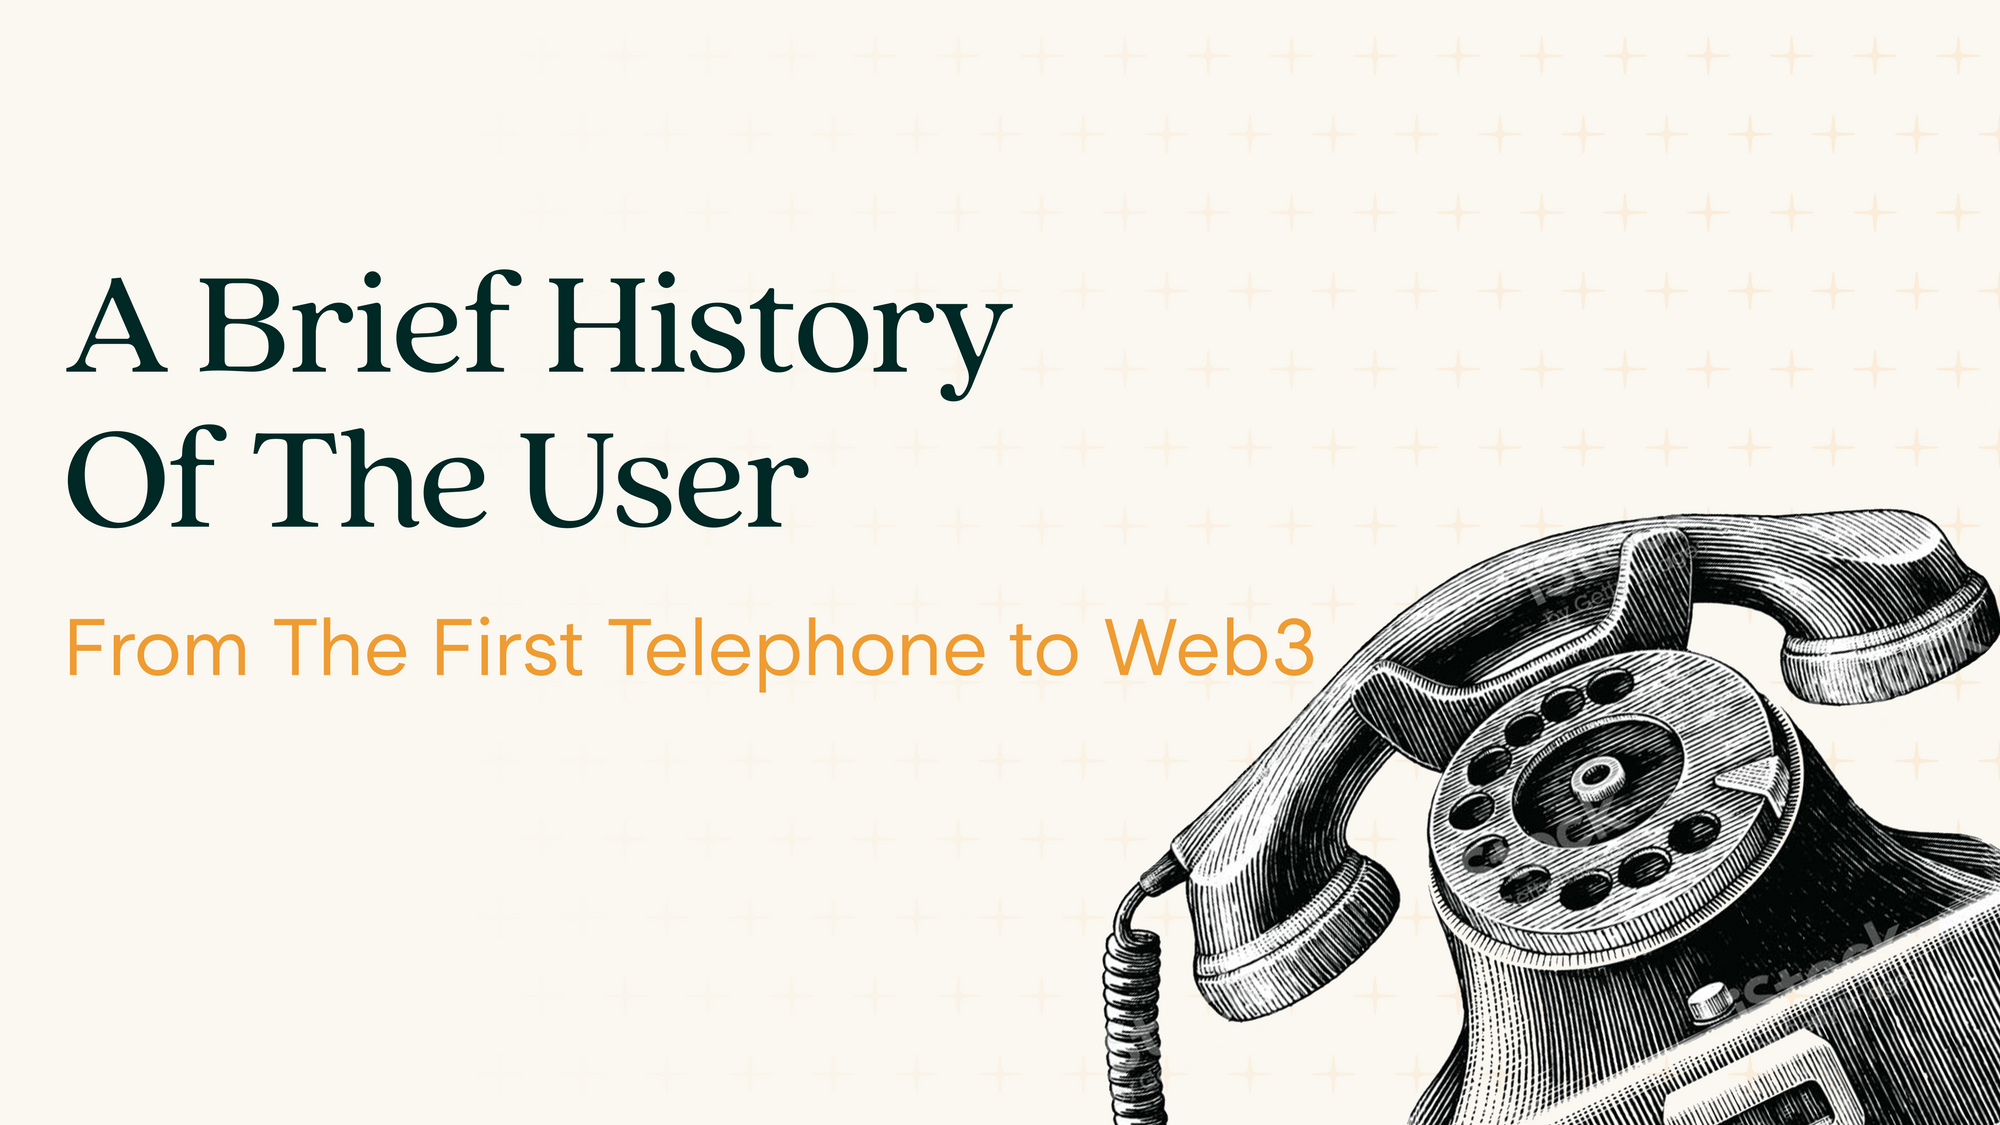 A Brief History Of The User: From The First Telephone to Web3